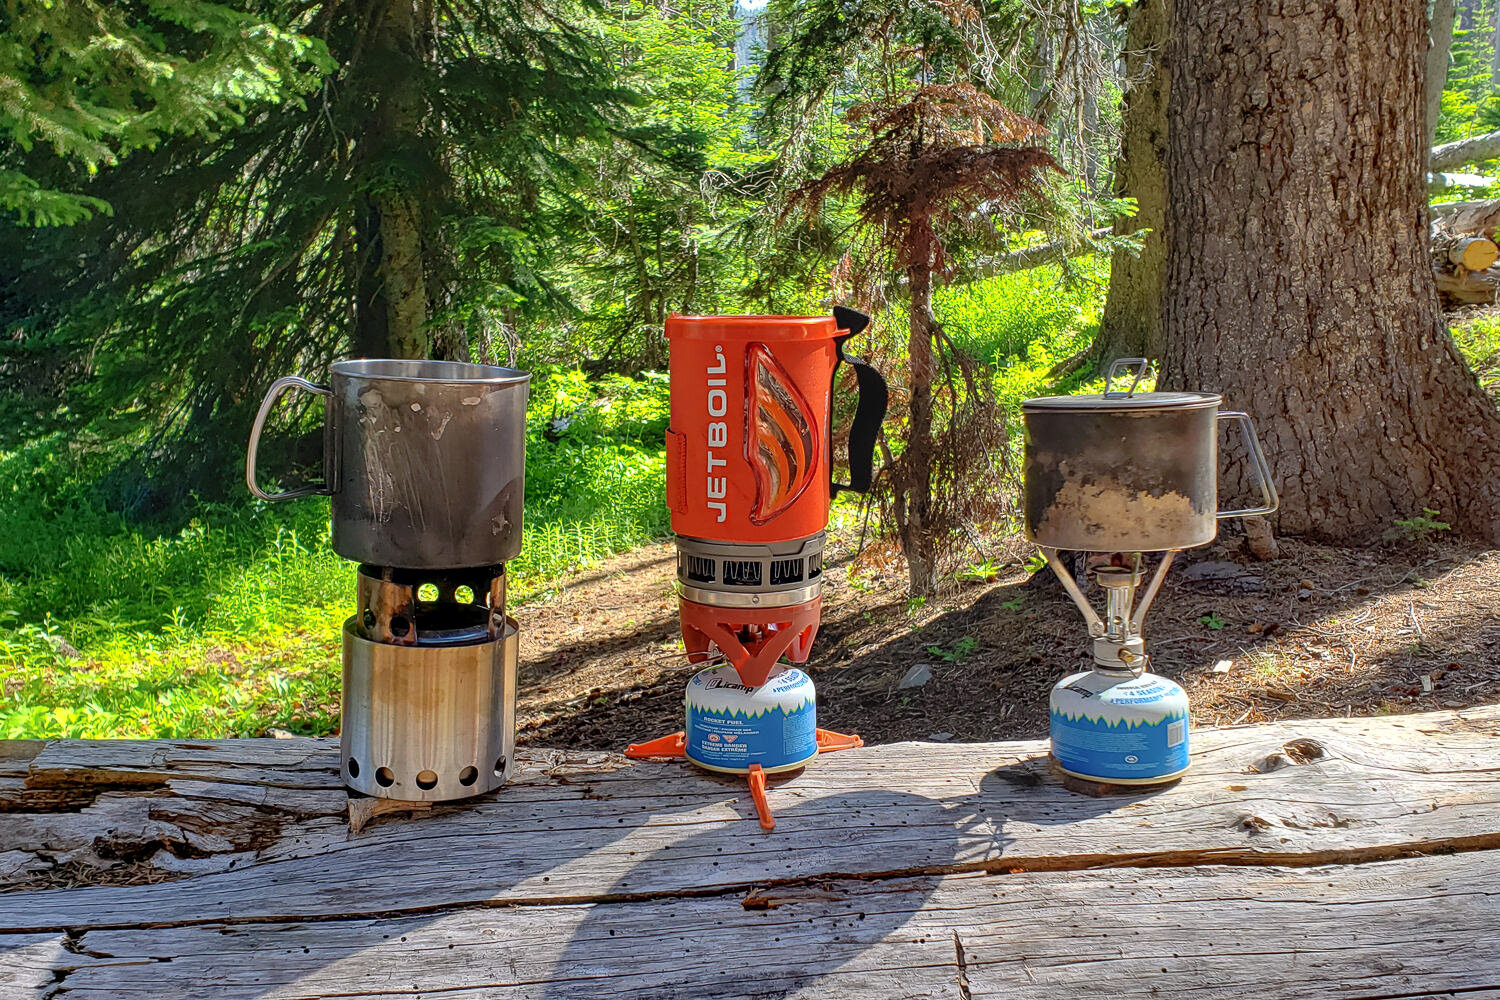 The Solo Stove Lite next to the Jetboil Flash and MSR Pocket Rocket Stoves for comparison.